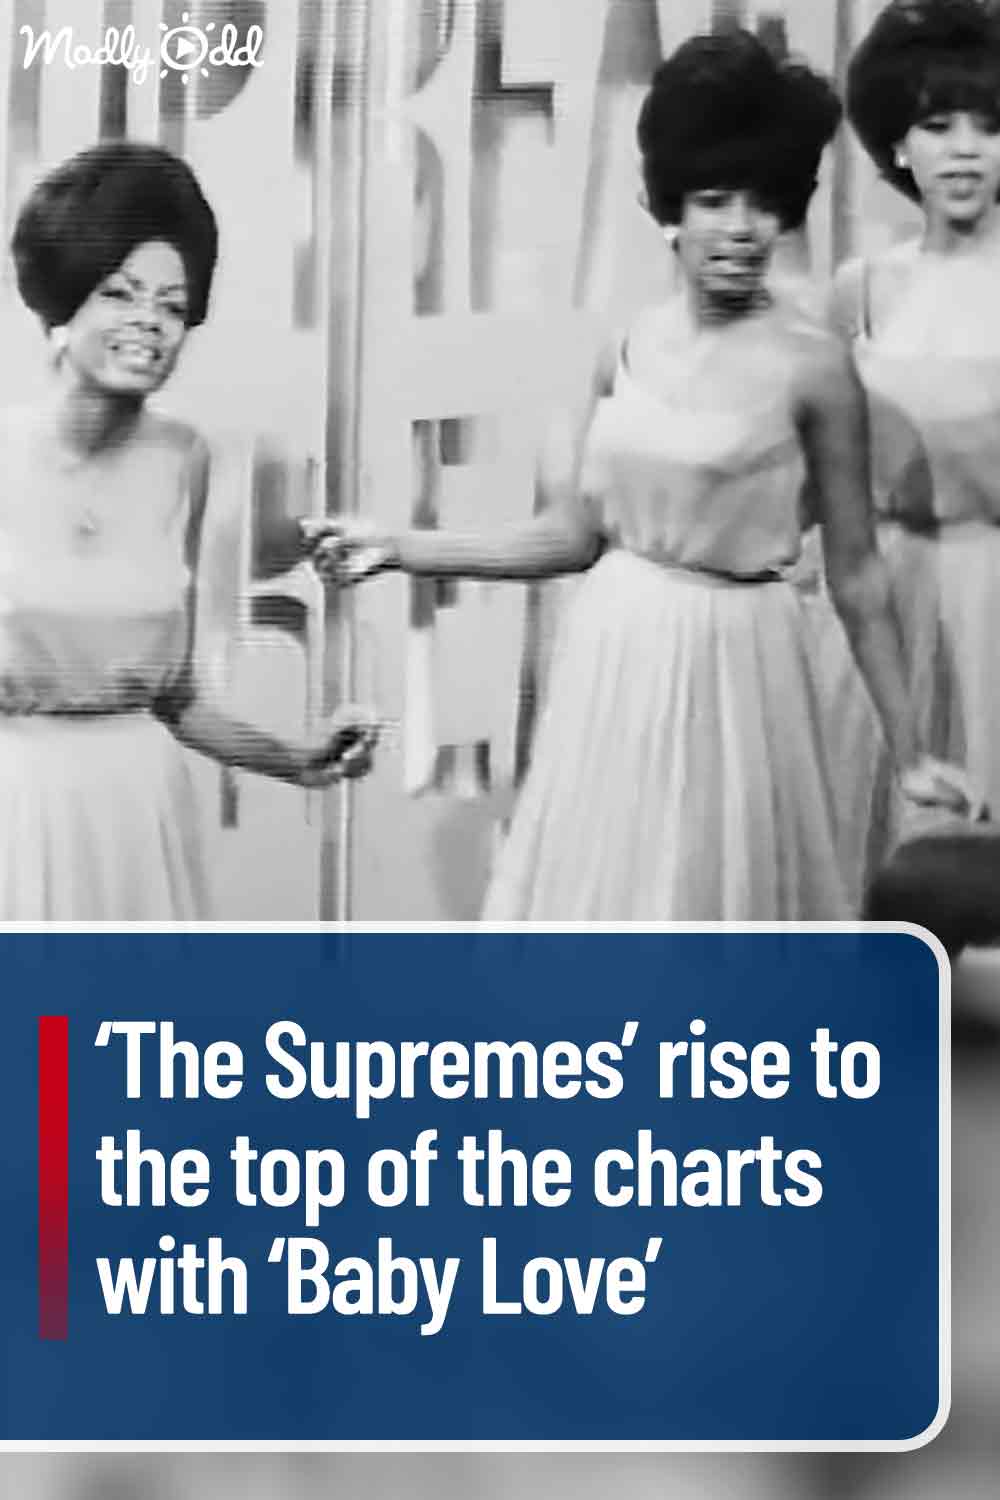 ‘The Supremes’ rise to the top of the charts with ‘Baby Love’